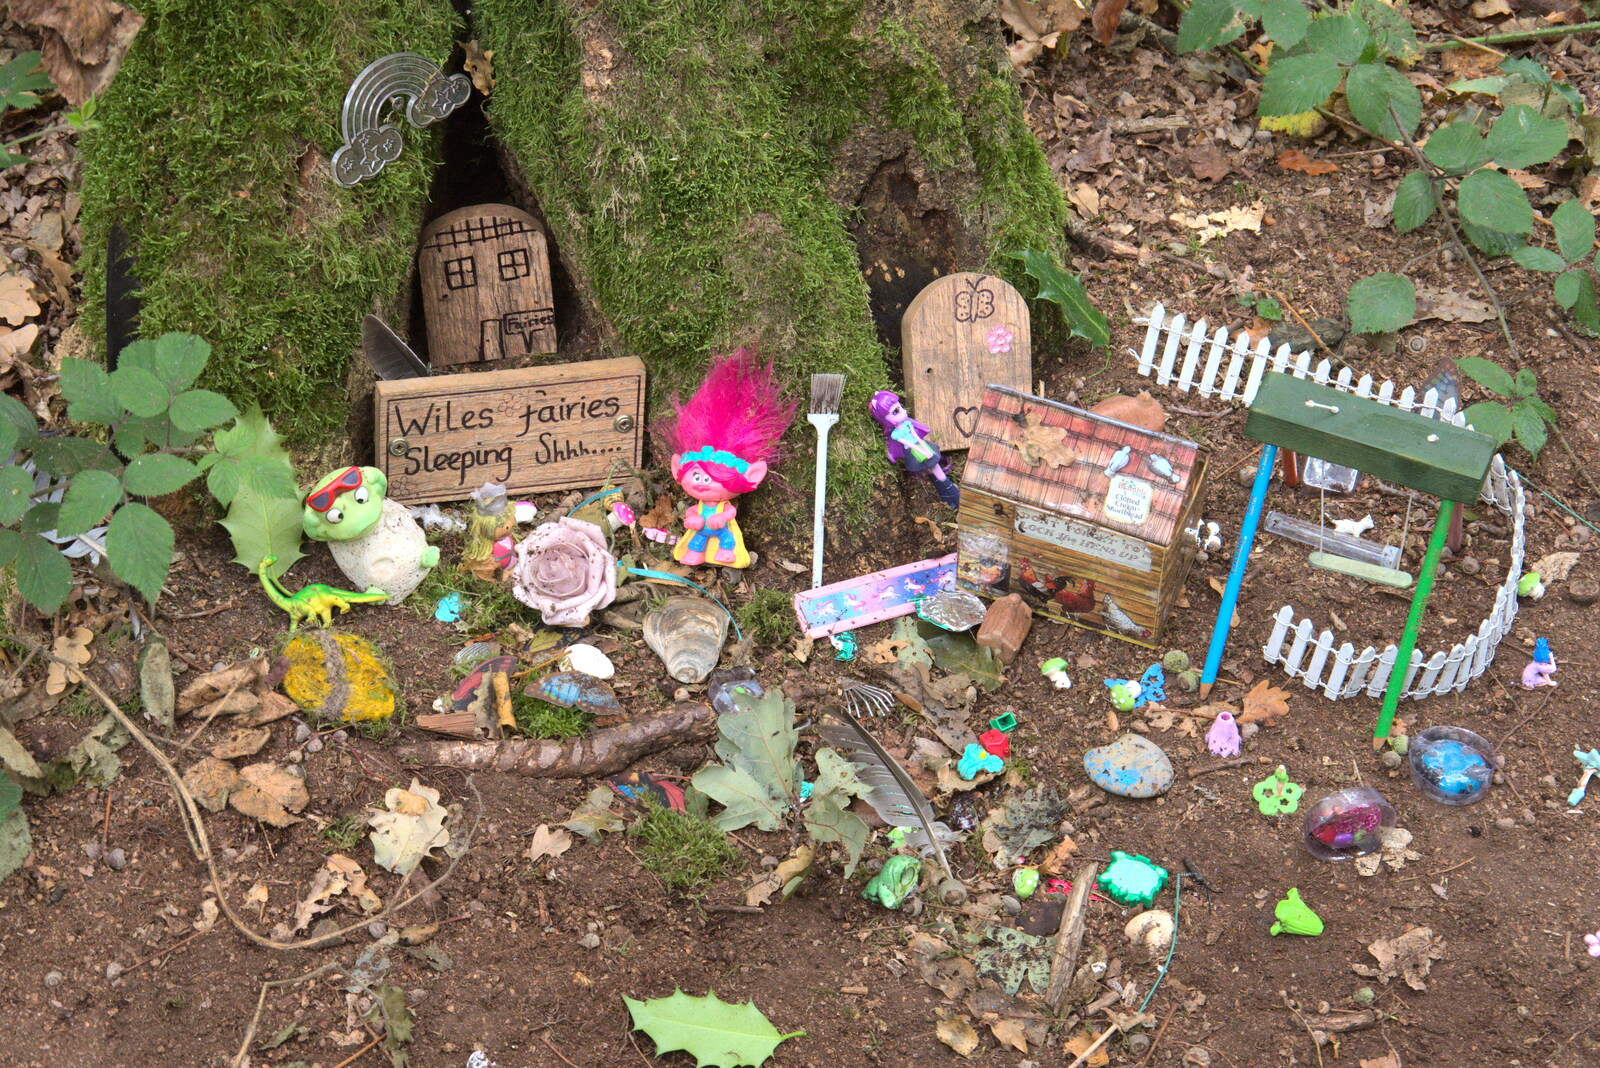 A fairy house from Jules Visits, and a Trip to Tyrrel's Wood, Pulham Market, Norfolk - 16th August 2020